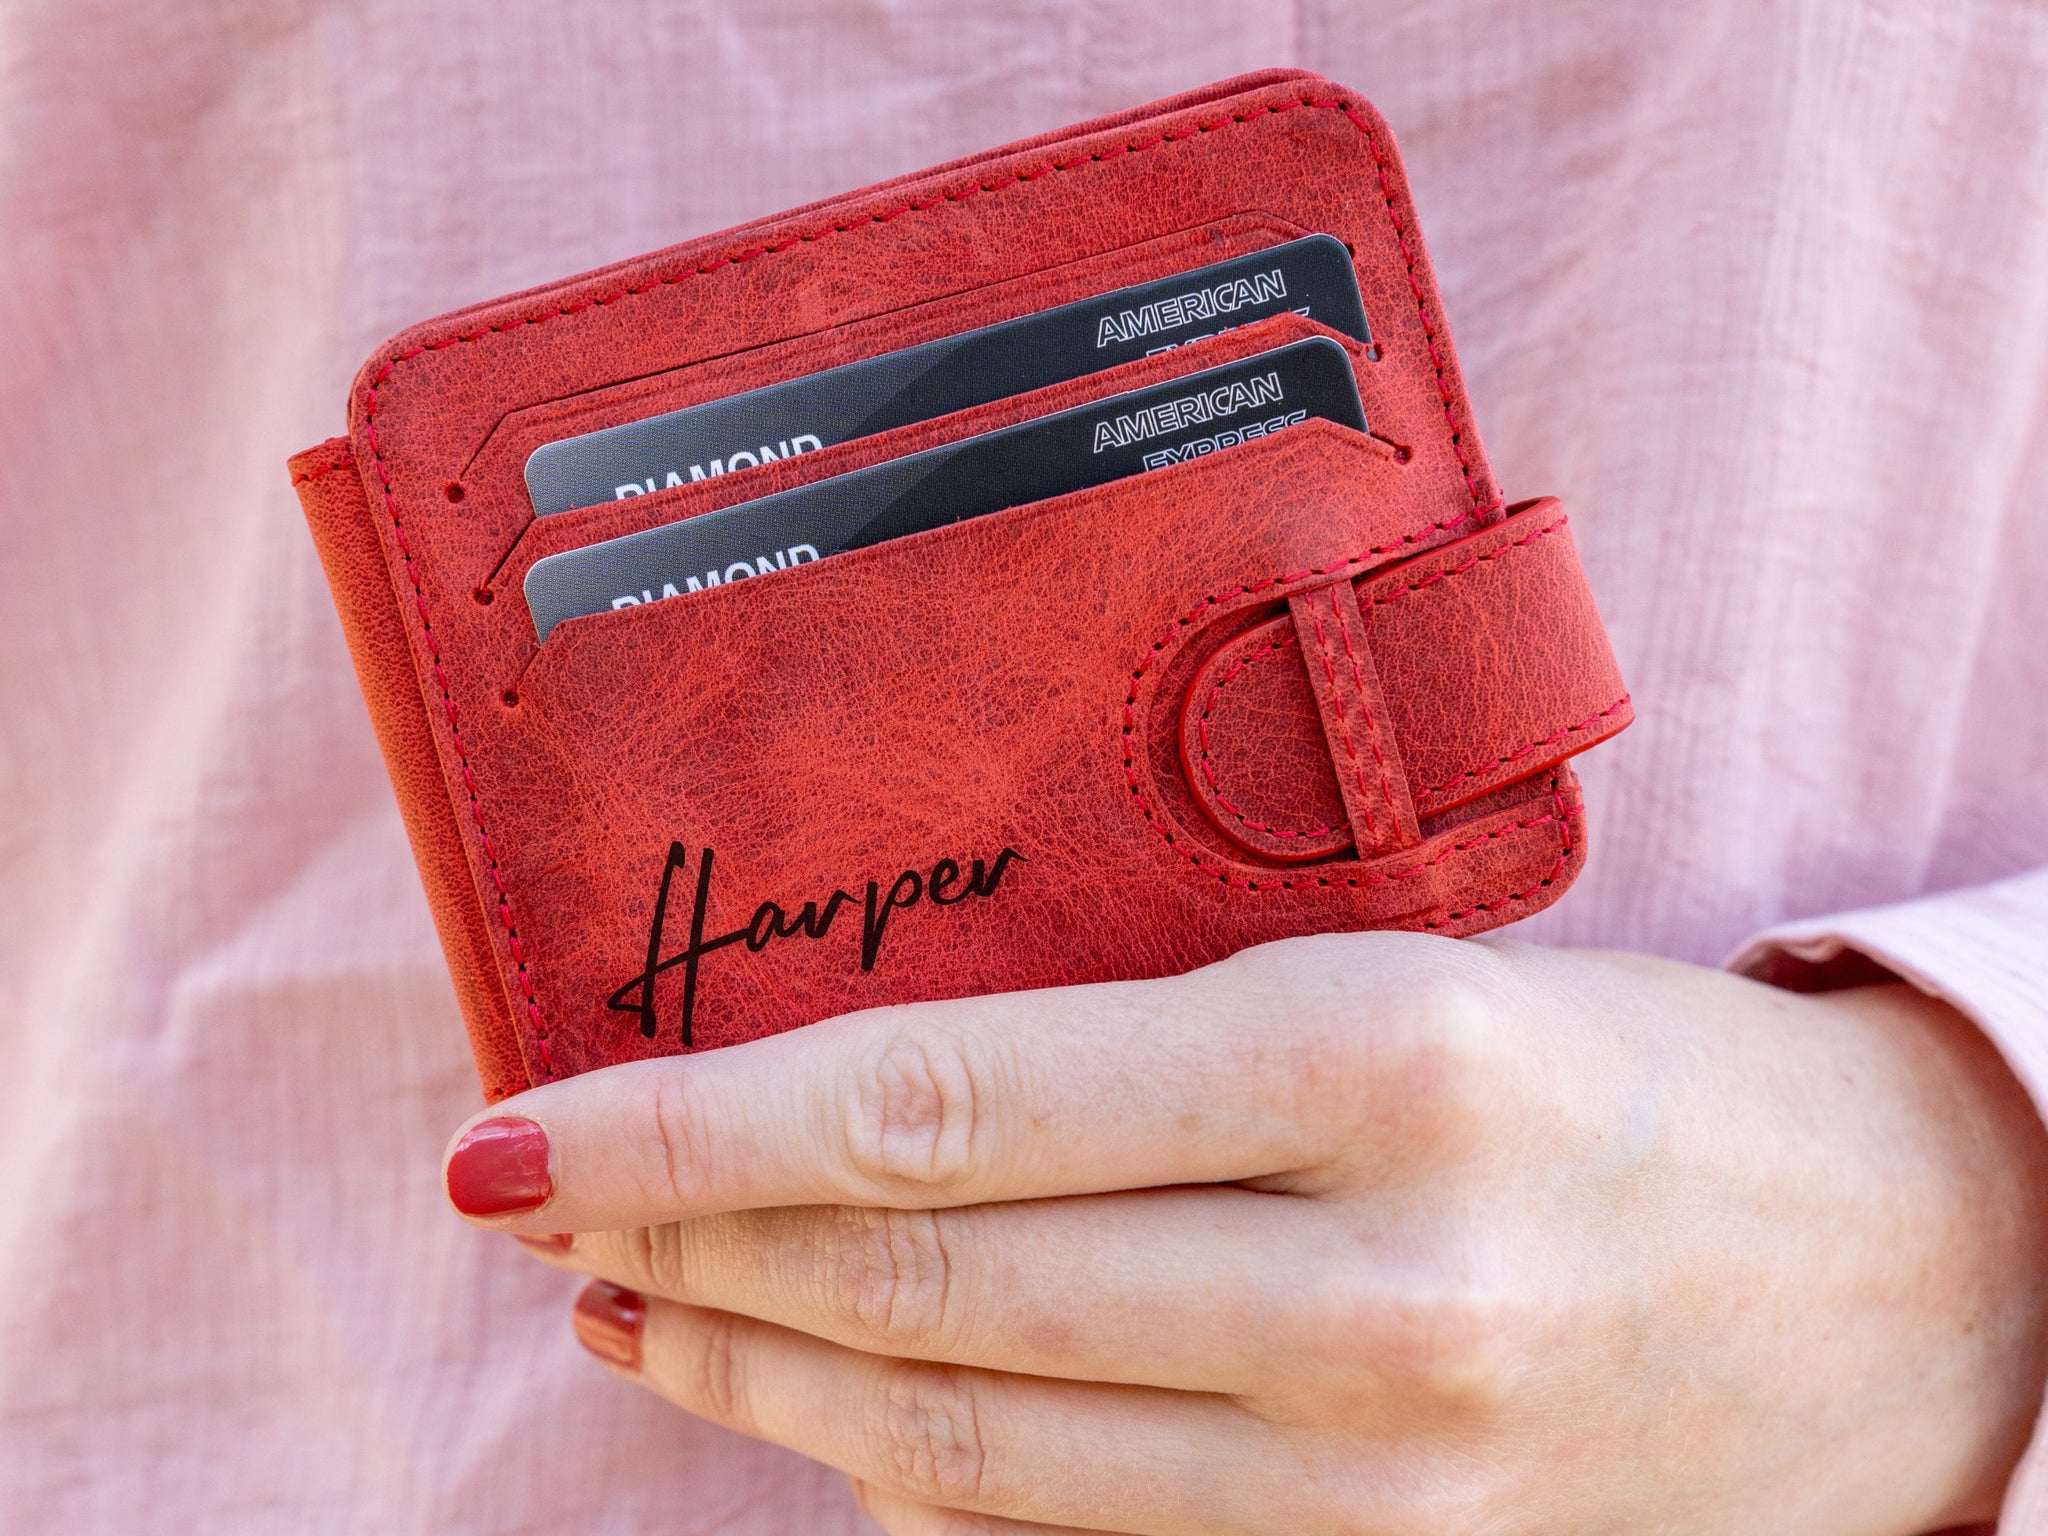 Red Leather Slim Card Holder Woman Leather Card Case Men 